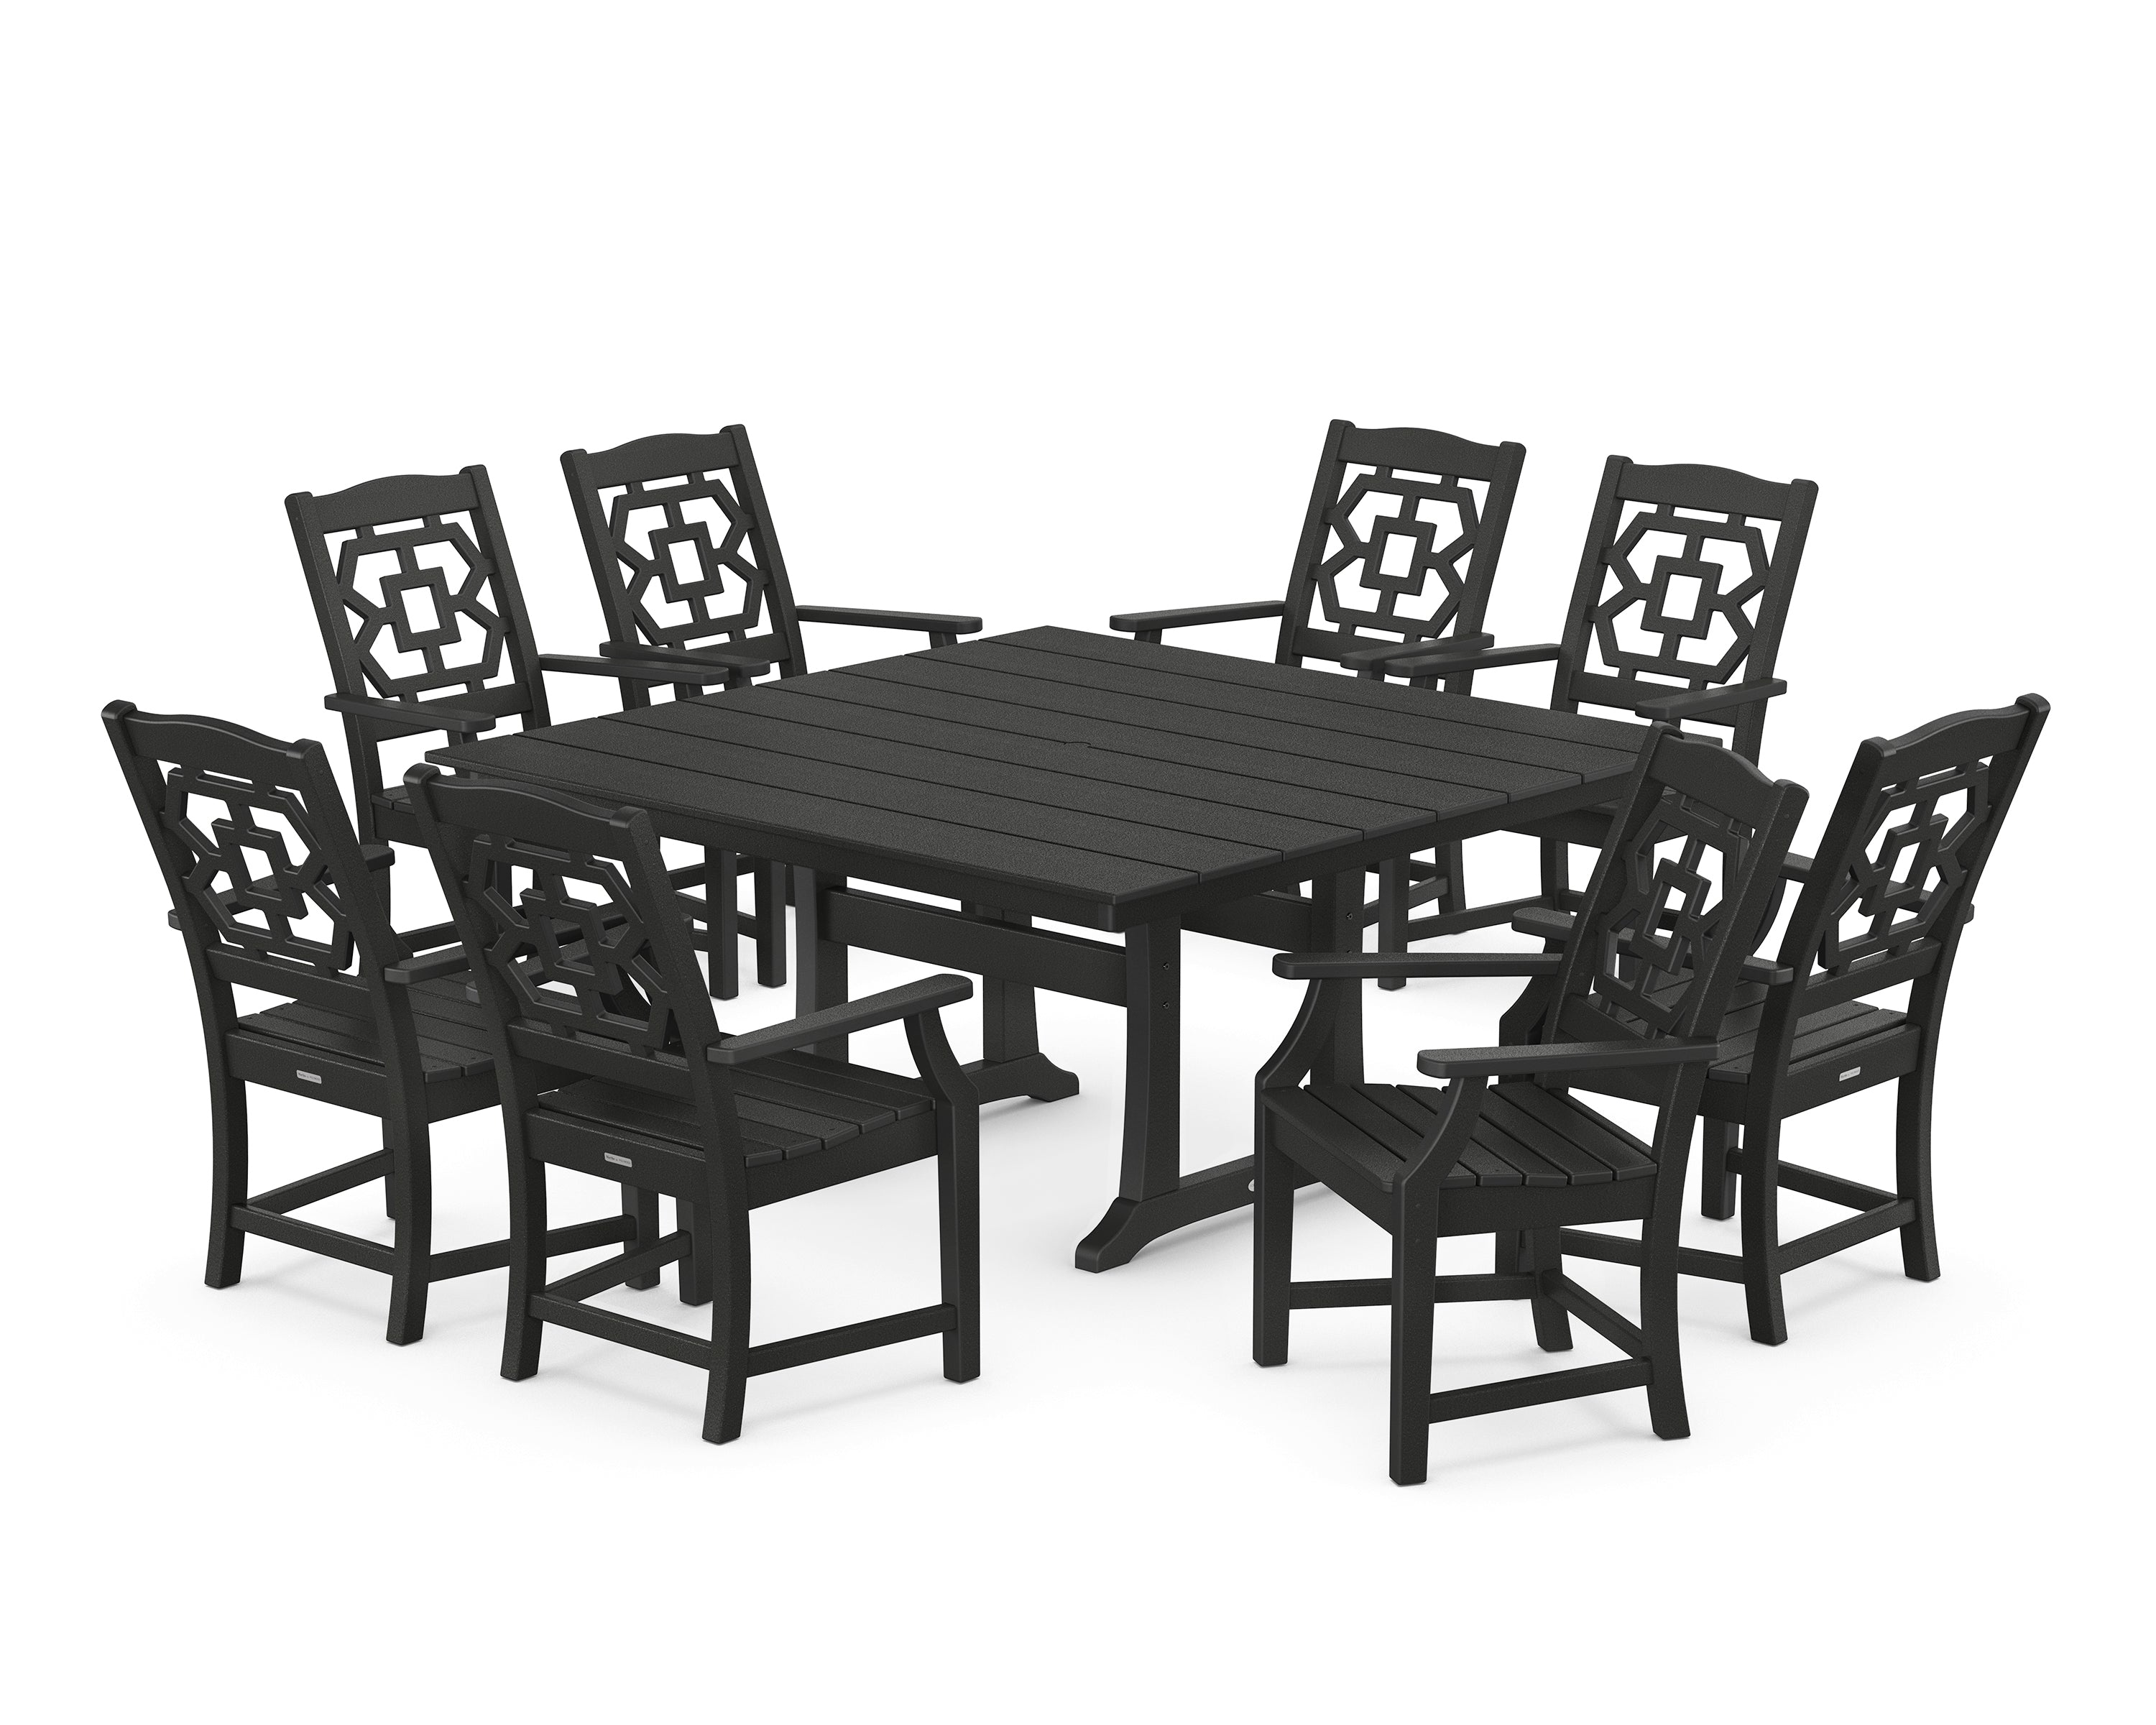 Martha Stewart by POLYWOOD® Chinoiserie 9-Piece Square Farmhouse Dining Set with Trestle Legs in Black